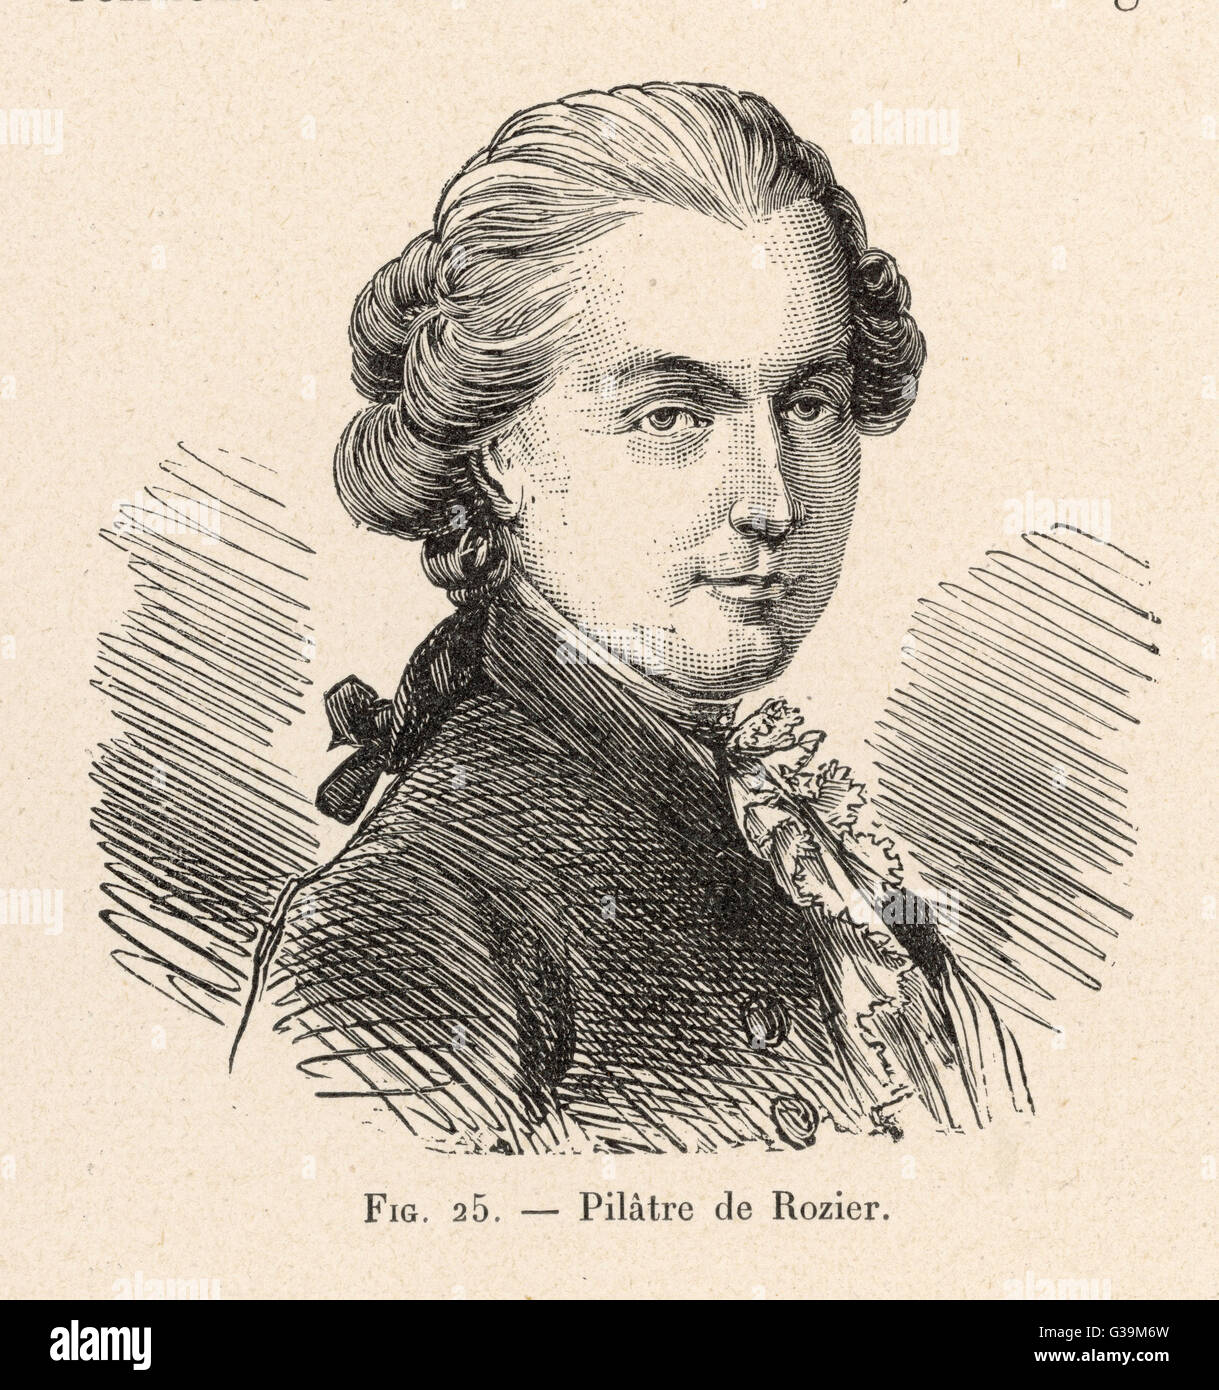 JEAN-FRANCOIS PILATRE DE  ROZIER French physicist and  aeronaut. First human being to  ascend in a balloon, with Montgolfier     Date: 1756 - 1785 Stock Photo